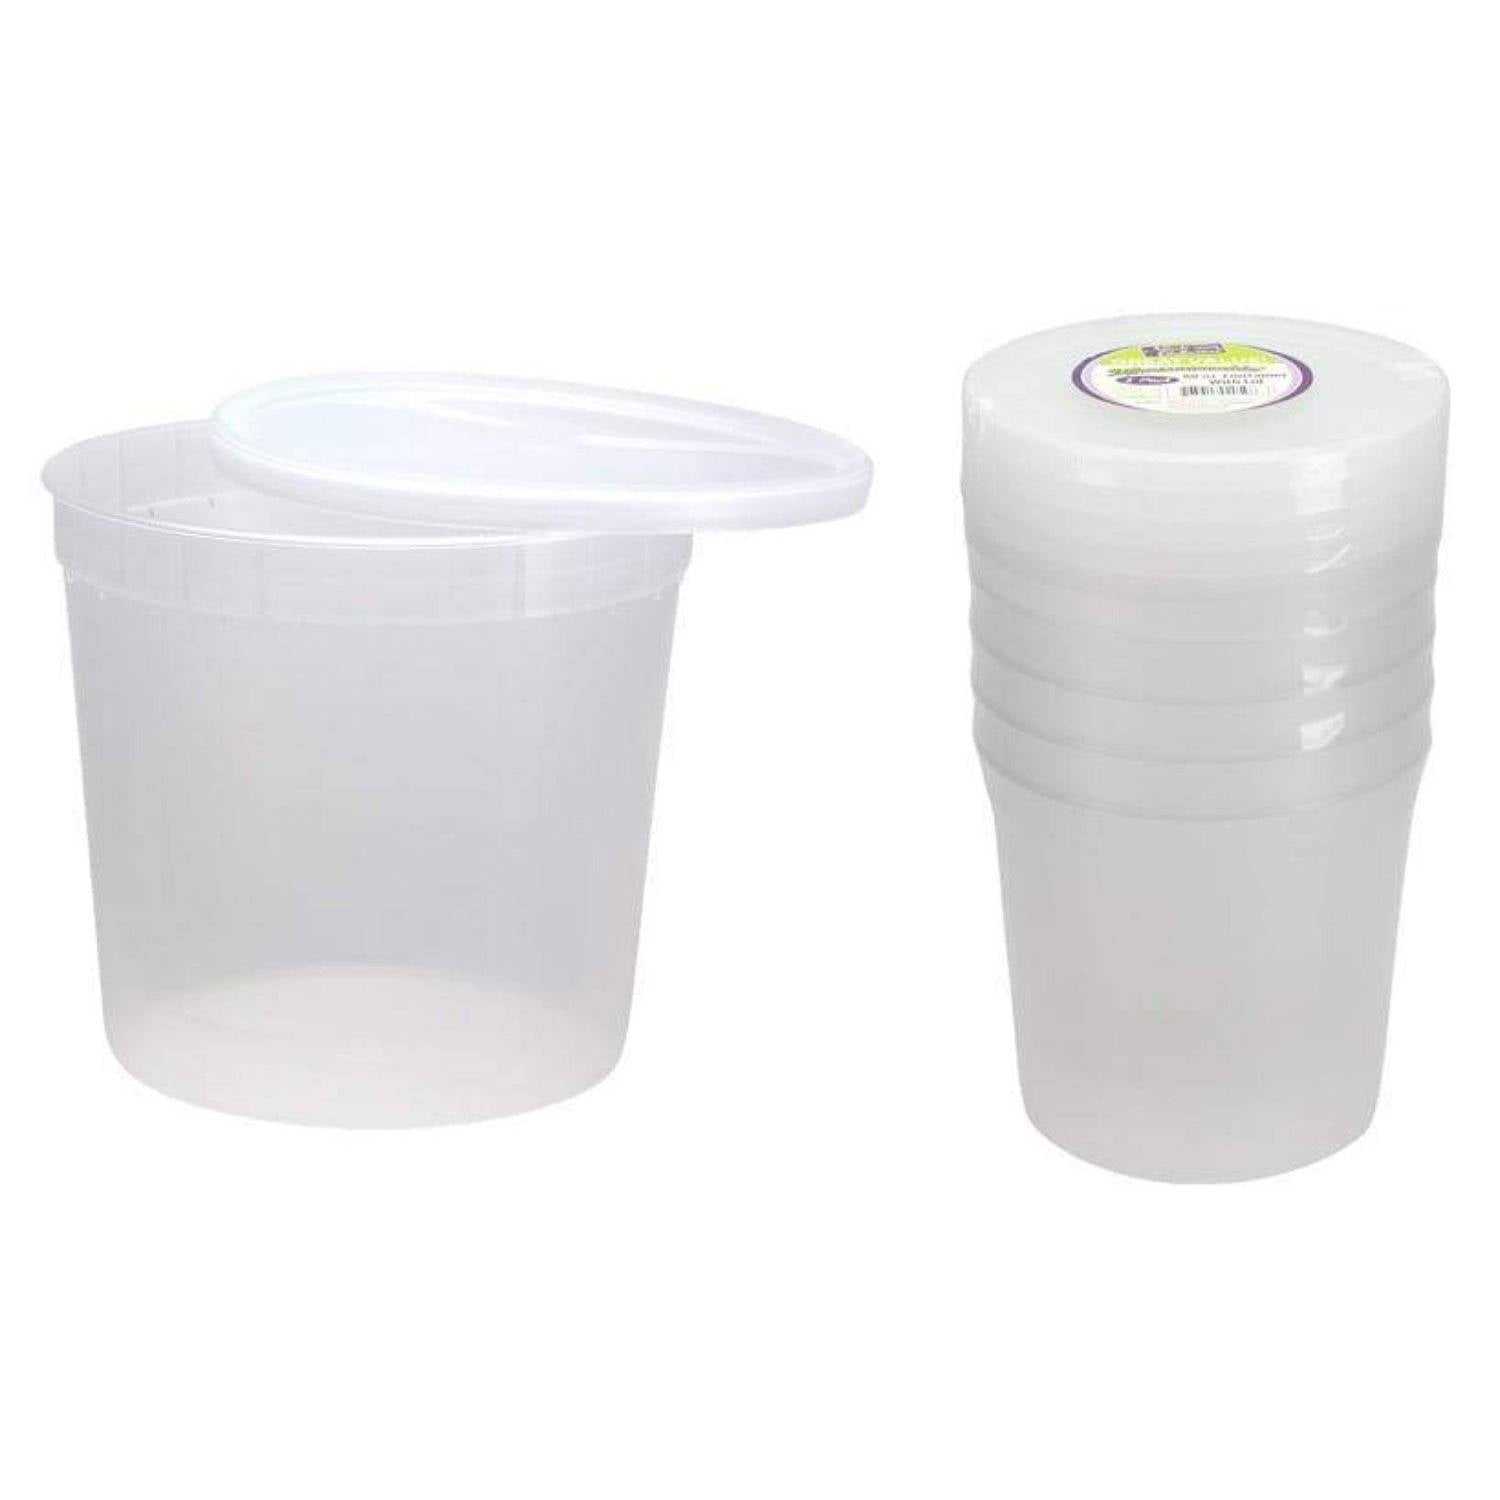  Decony Plastic Deli Containers with Lids 8 Oz- 25 Pack